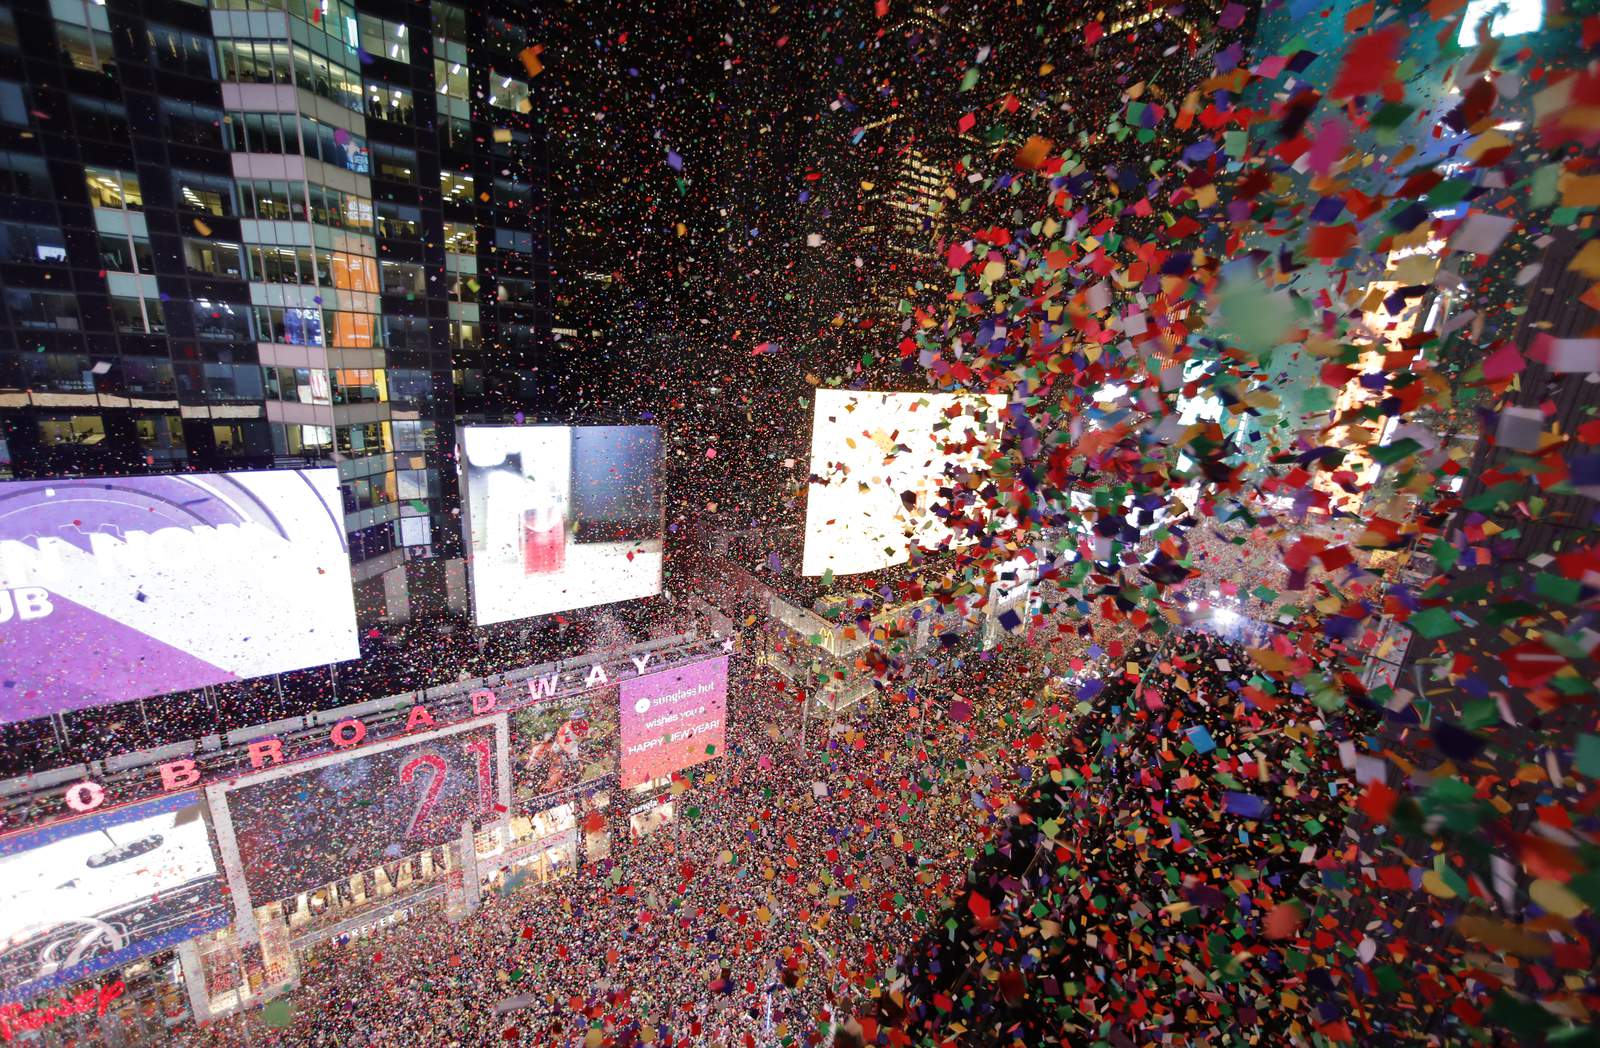 This is what New Year’s Eve looked like a year ago